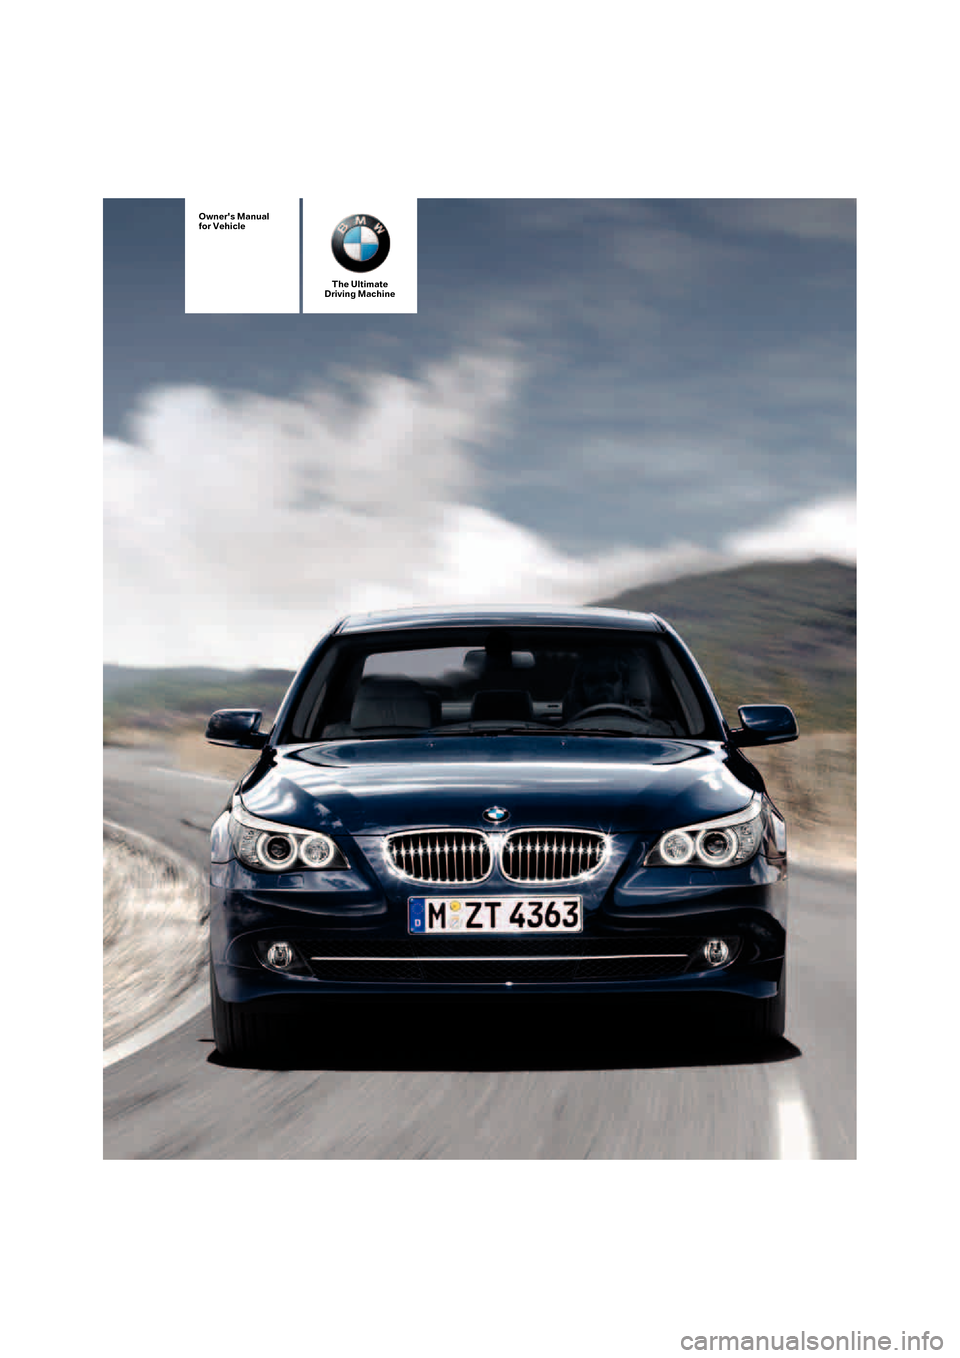 BMW 528I SEDAN 2008 E60 Owners Manual The Ultimate
Driving Machine
Owners Manual
for Vehicle 